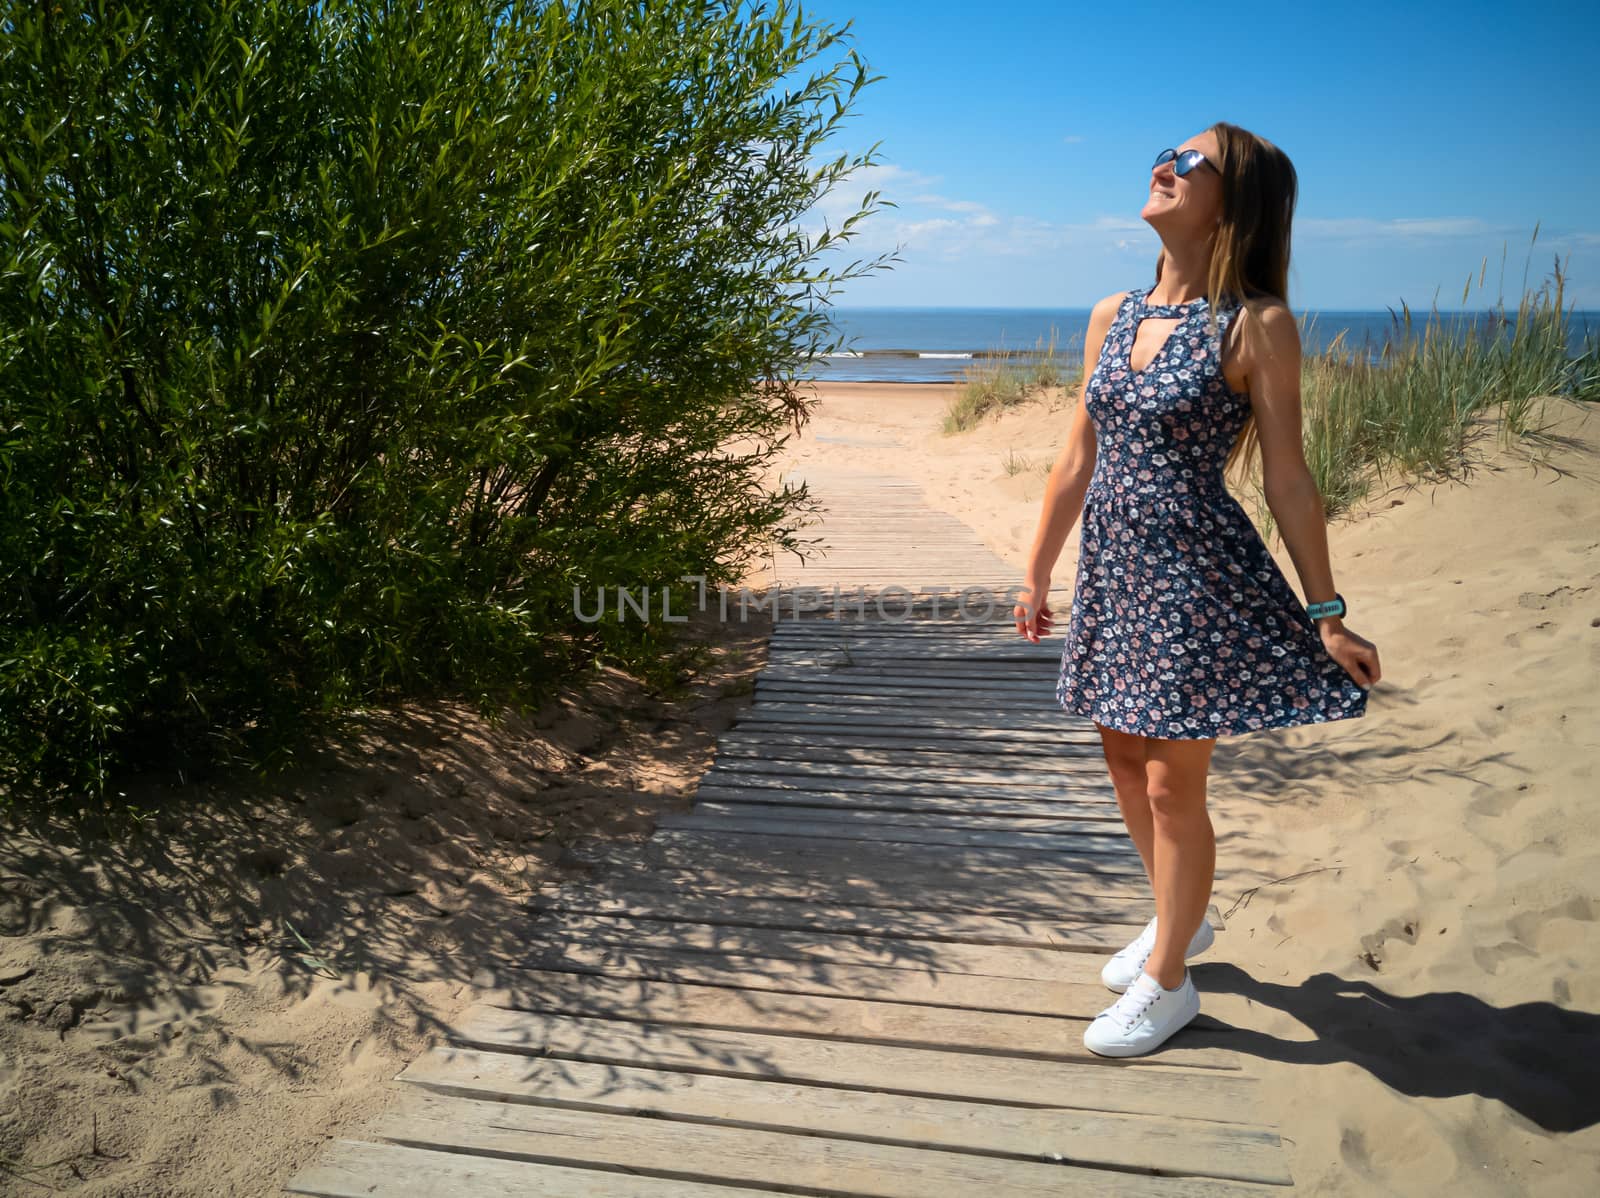 beautiful smiling girl alone on the beach. wooden path, blue sky and ocean background. Young woman in dress